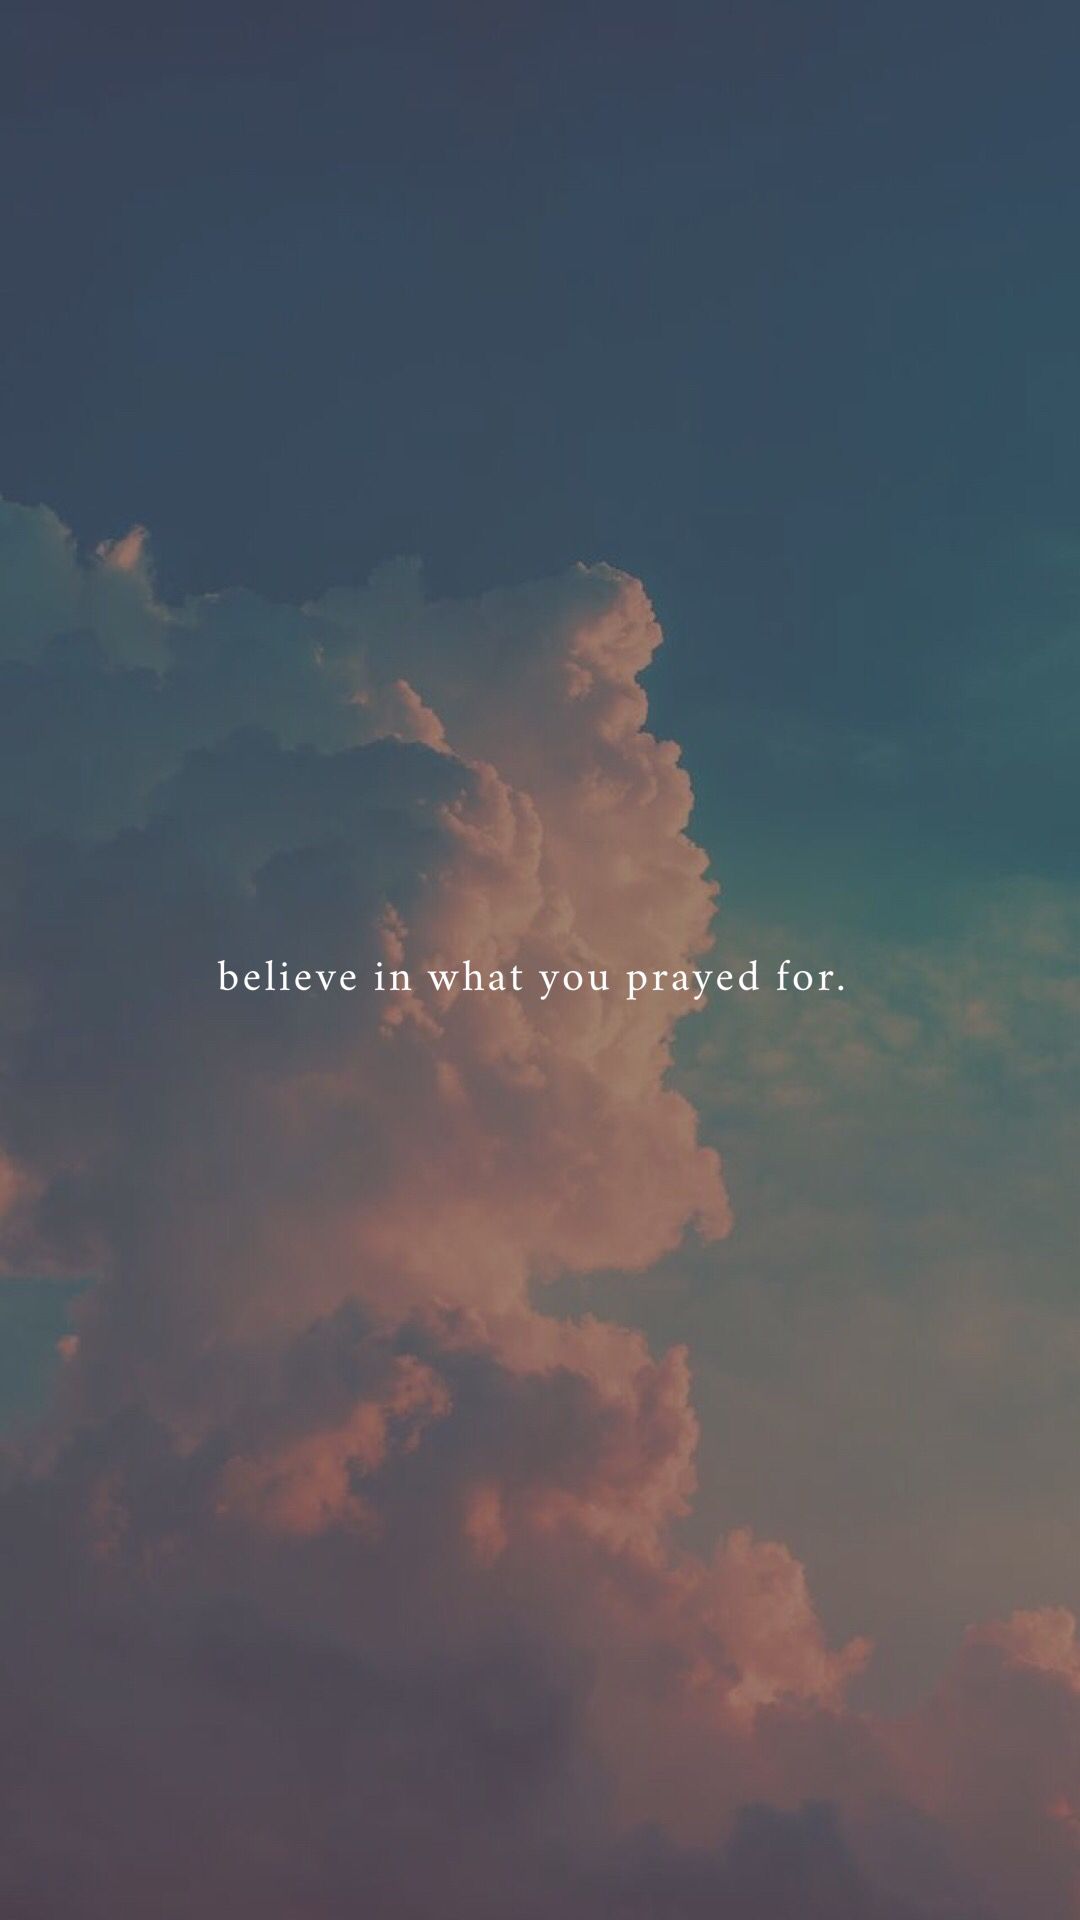 believe in what you prayed for.”. Bible quotes wallpaper, Wallpaper quotes, Worship quotes